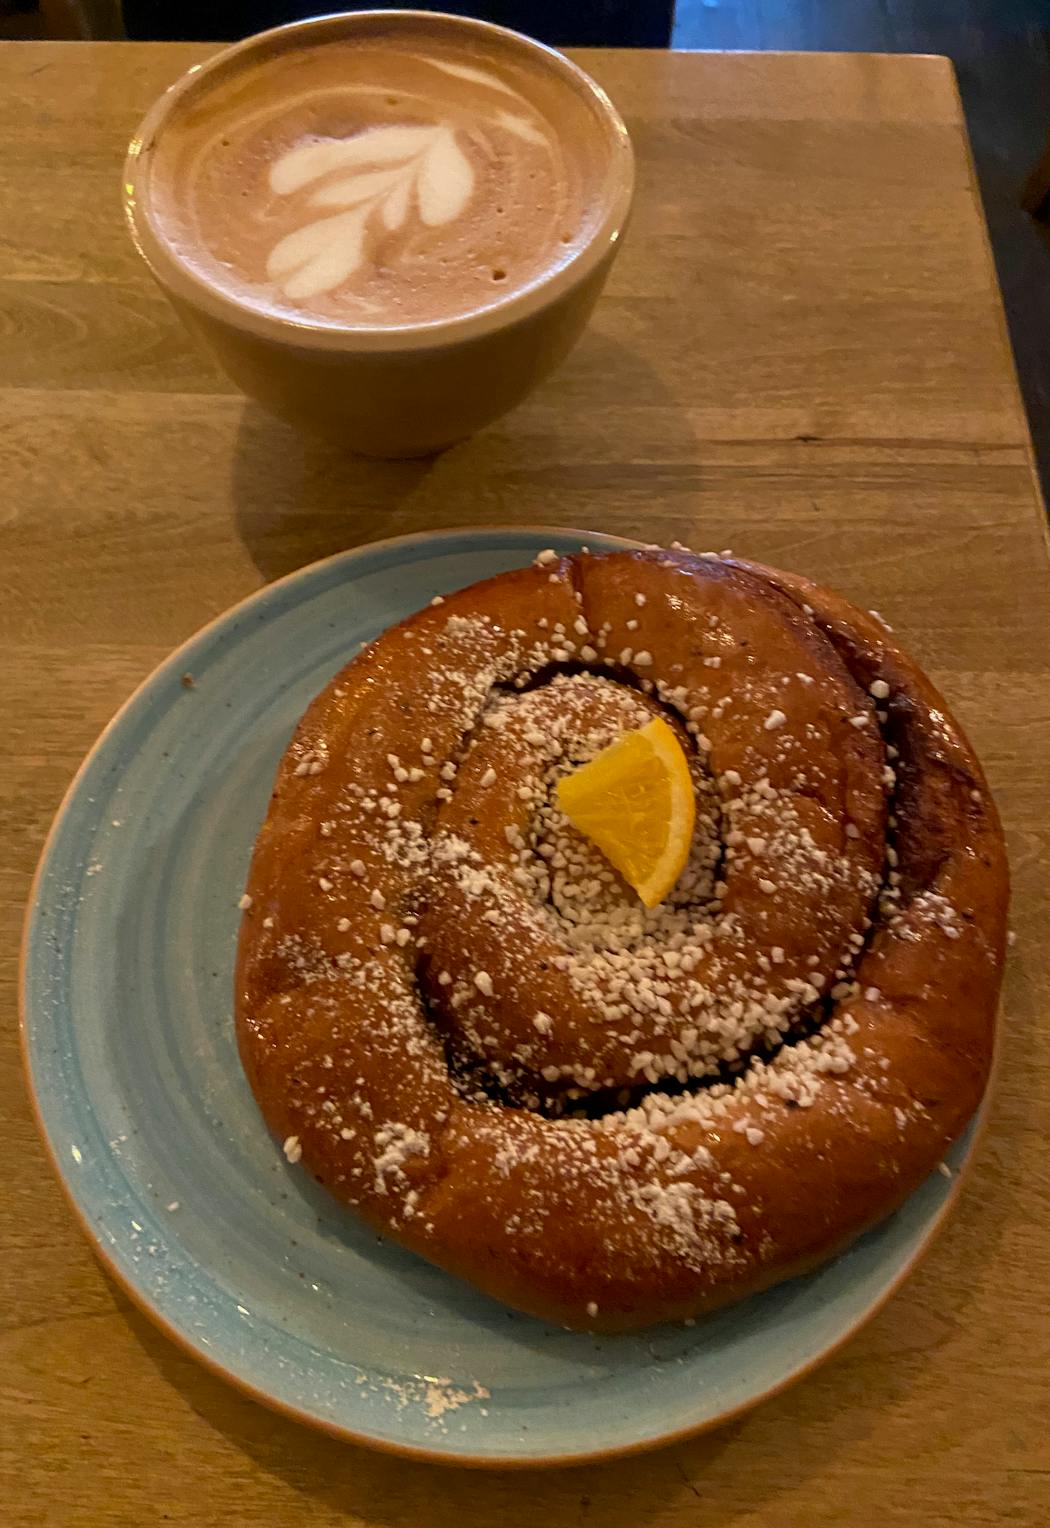 It is customary in Sweden to take a glorified coffee break known as fika, perhaps with the addition of a cinnamon bun or slice of pie or both.